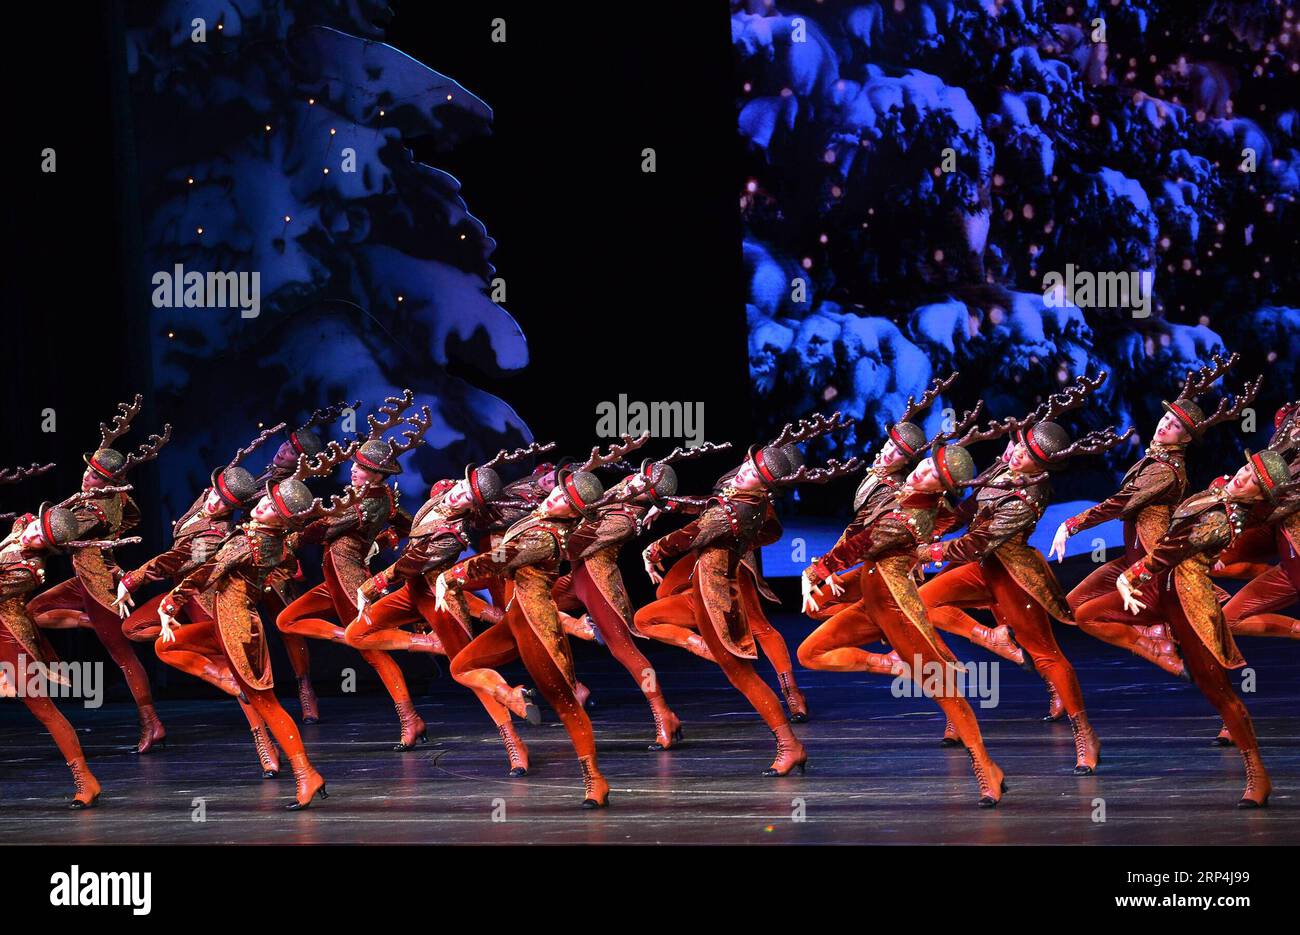 181110) -- NEW YORK, Nov. 10, 2018 -- The Rockettes perform during the 2018  production of Christmas Spectacular show at Radio City Music Hall in New  York, the United States, on Nov.